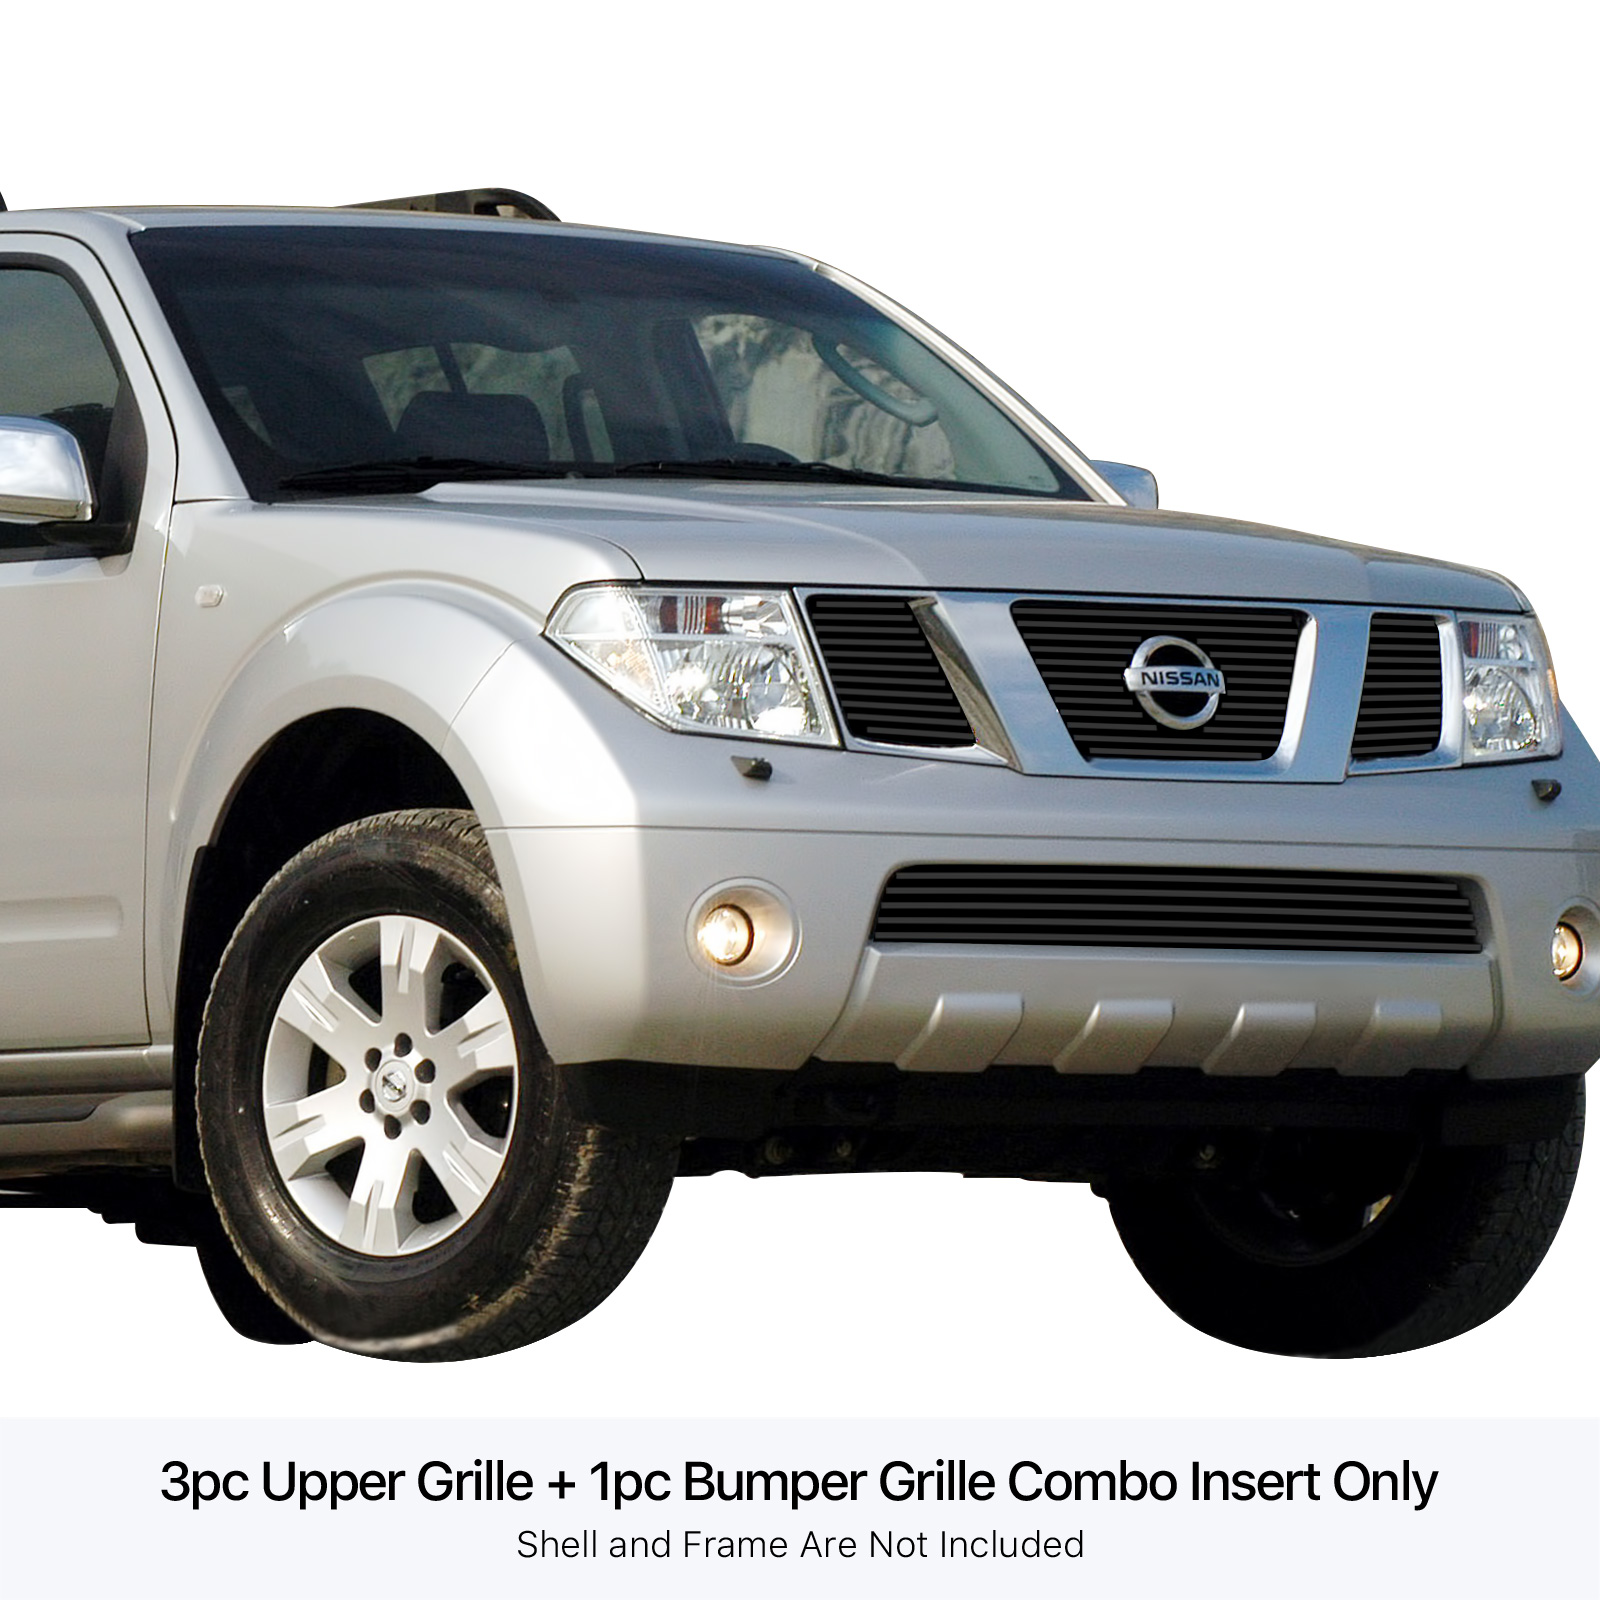 2005-2007 Nissan Pathfinder With Logo Show/2005-2008 Nissan Frontier With Logo Show MAIN UPPER + LOWER BUMPER Black Stainless Steel Billet Grille